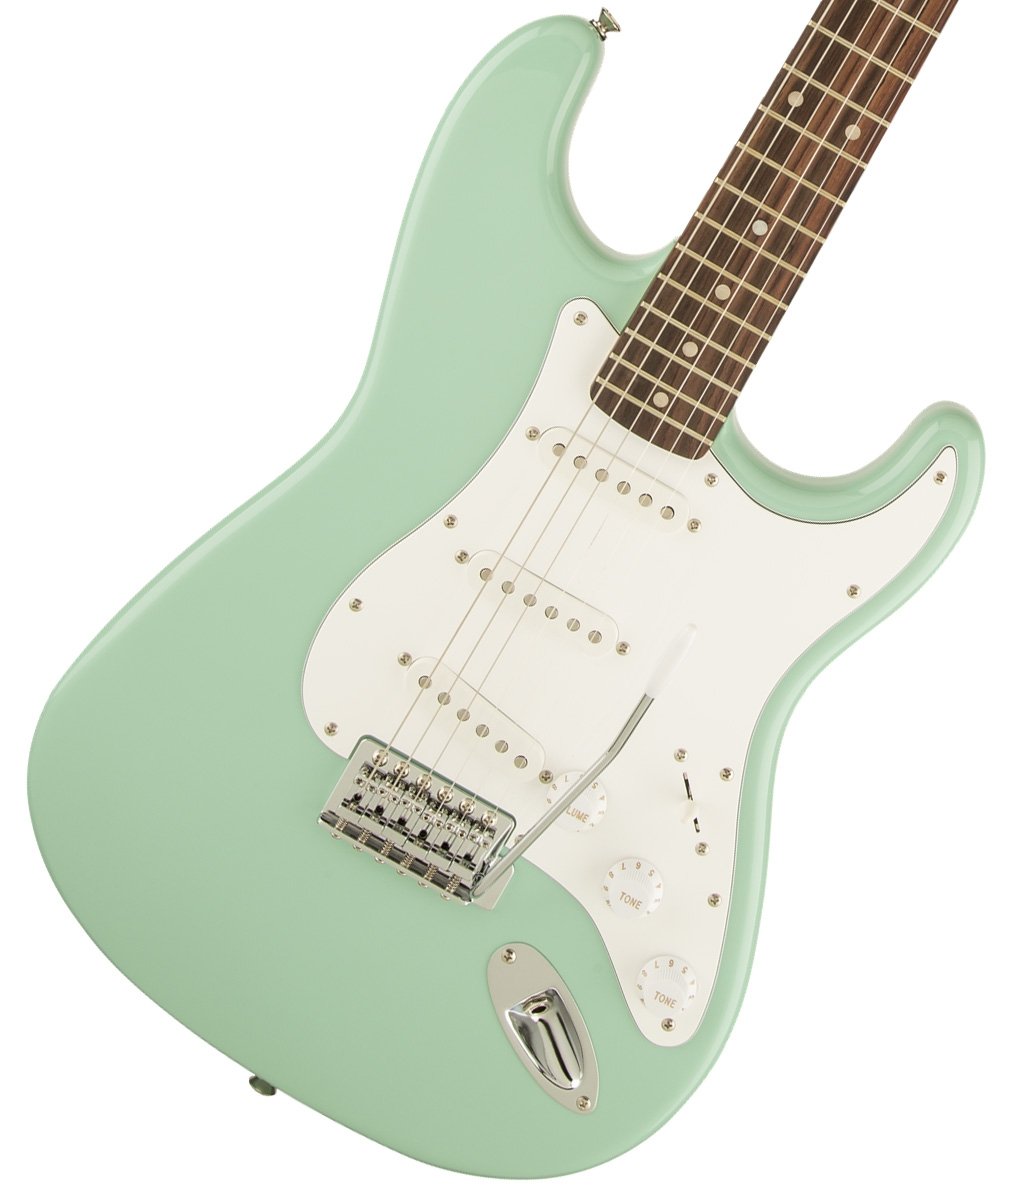 Squier by Fender / Affinity Stratocaster Surf Green Laurel Fingerboard  エレキギター